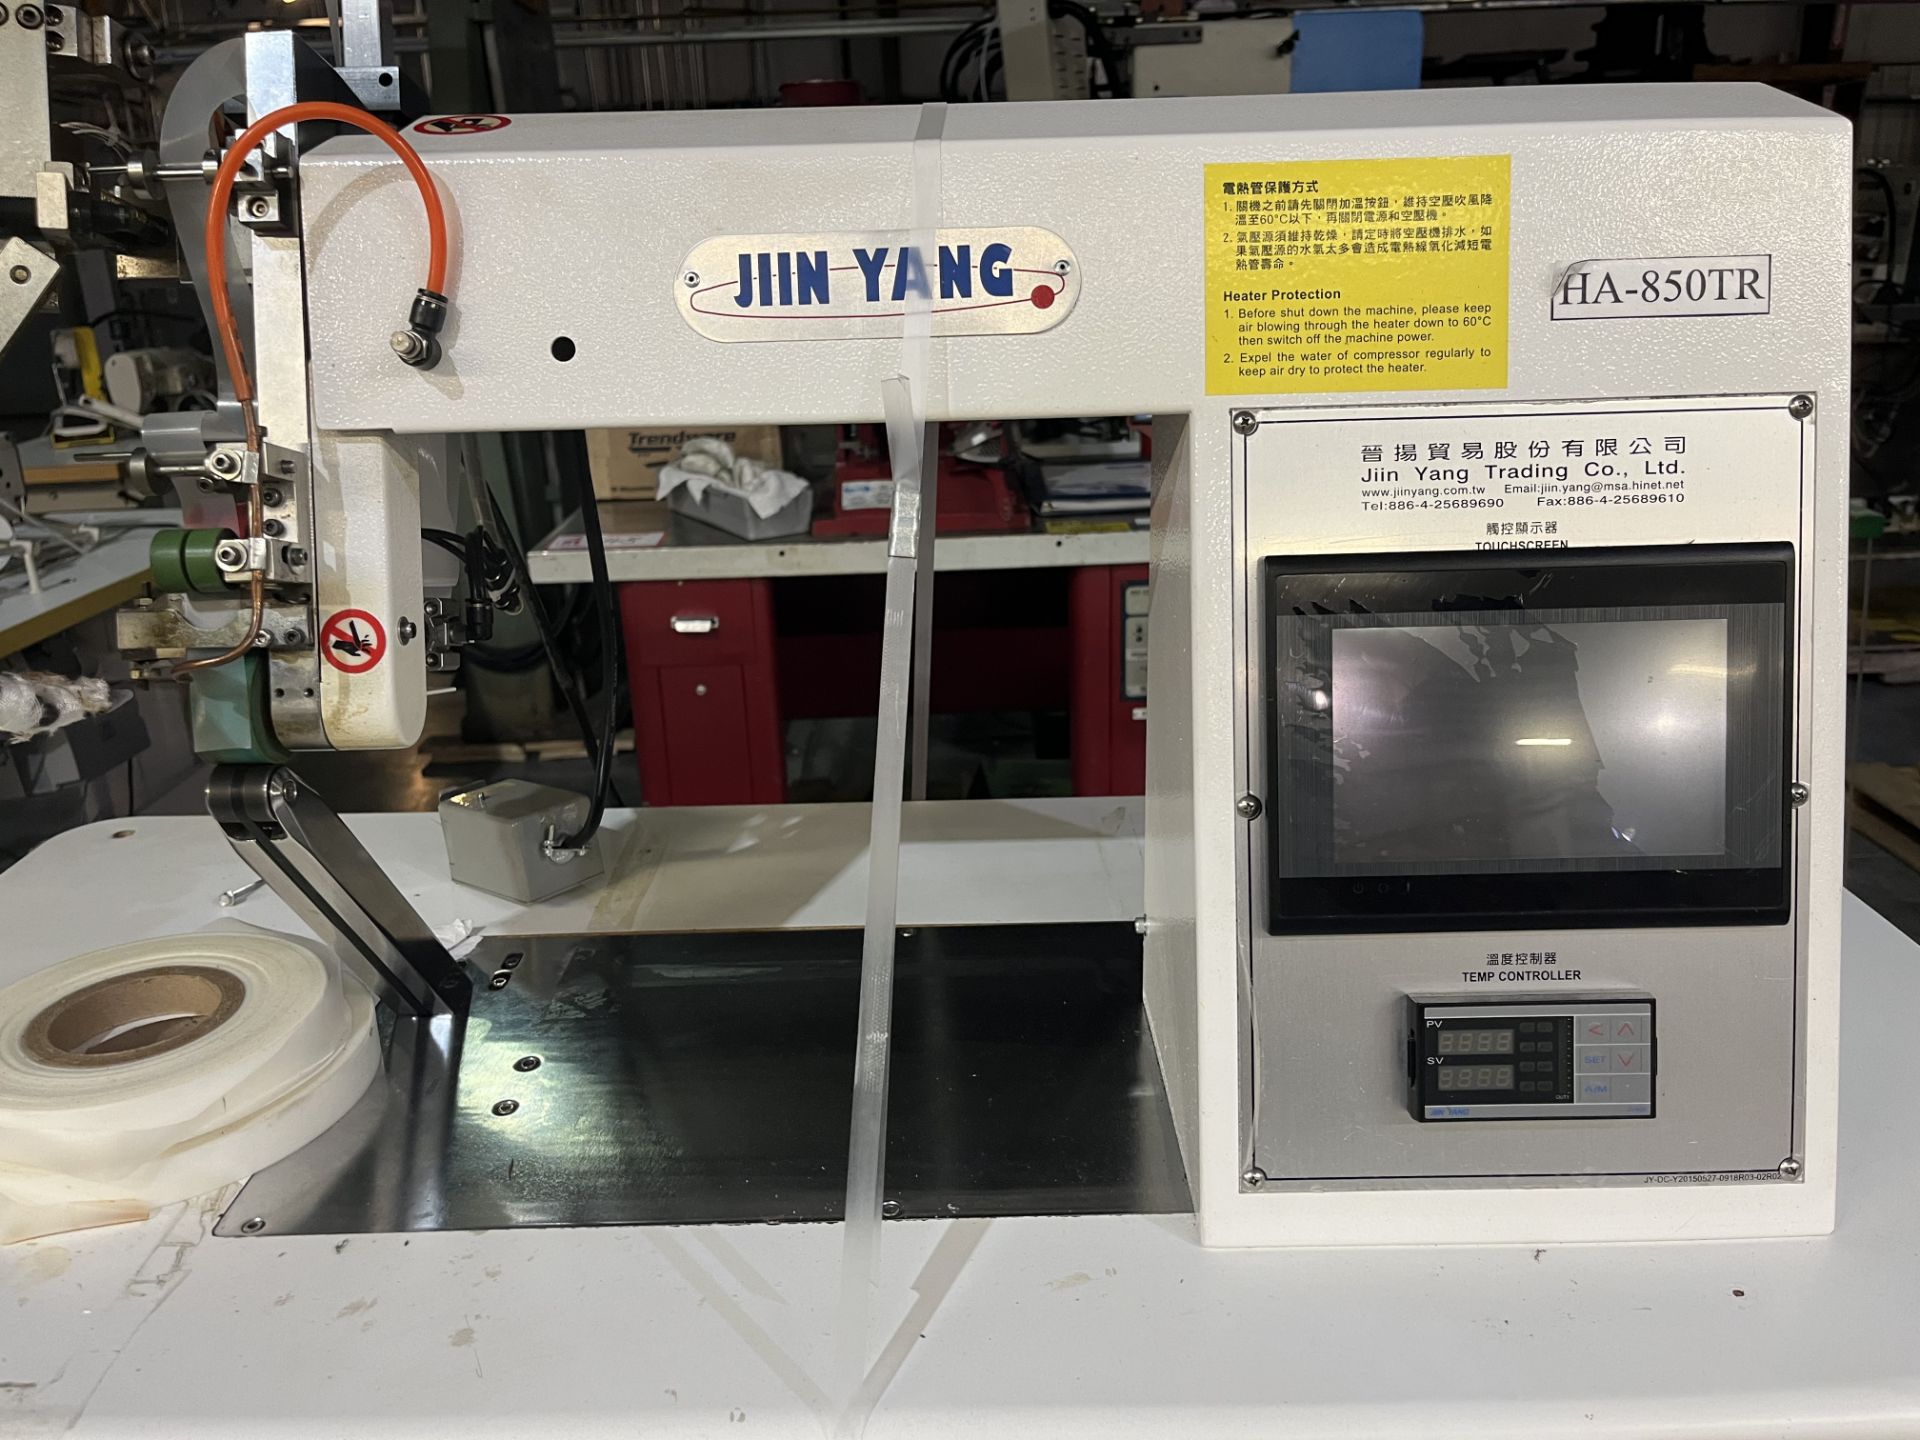 JIIN Yang Model HA 850TR Seam Sealing 220 Volt Single Phase Machine in Good, Working Condition S/N - Image 4 of 8